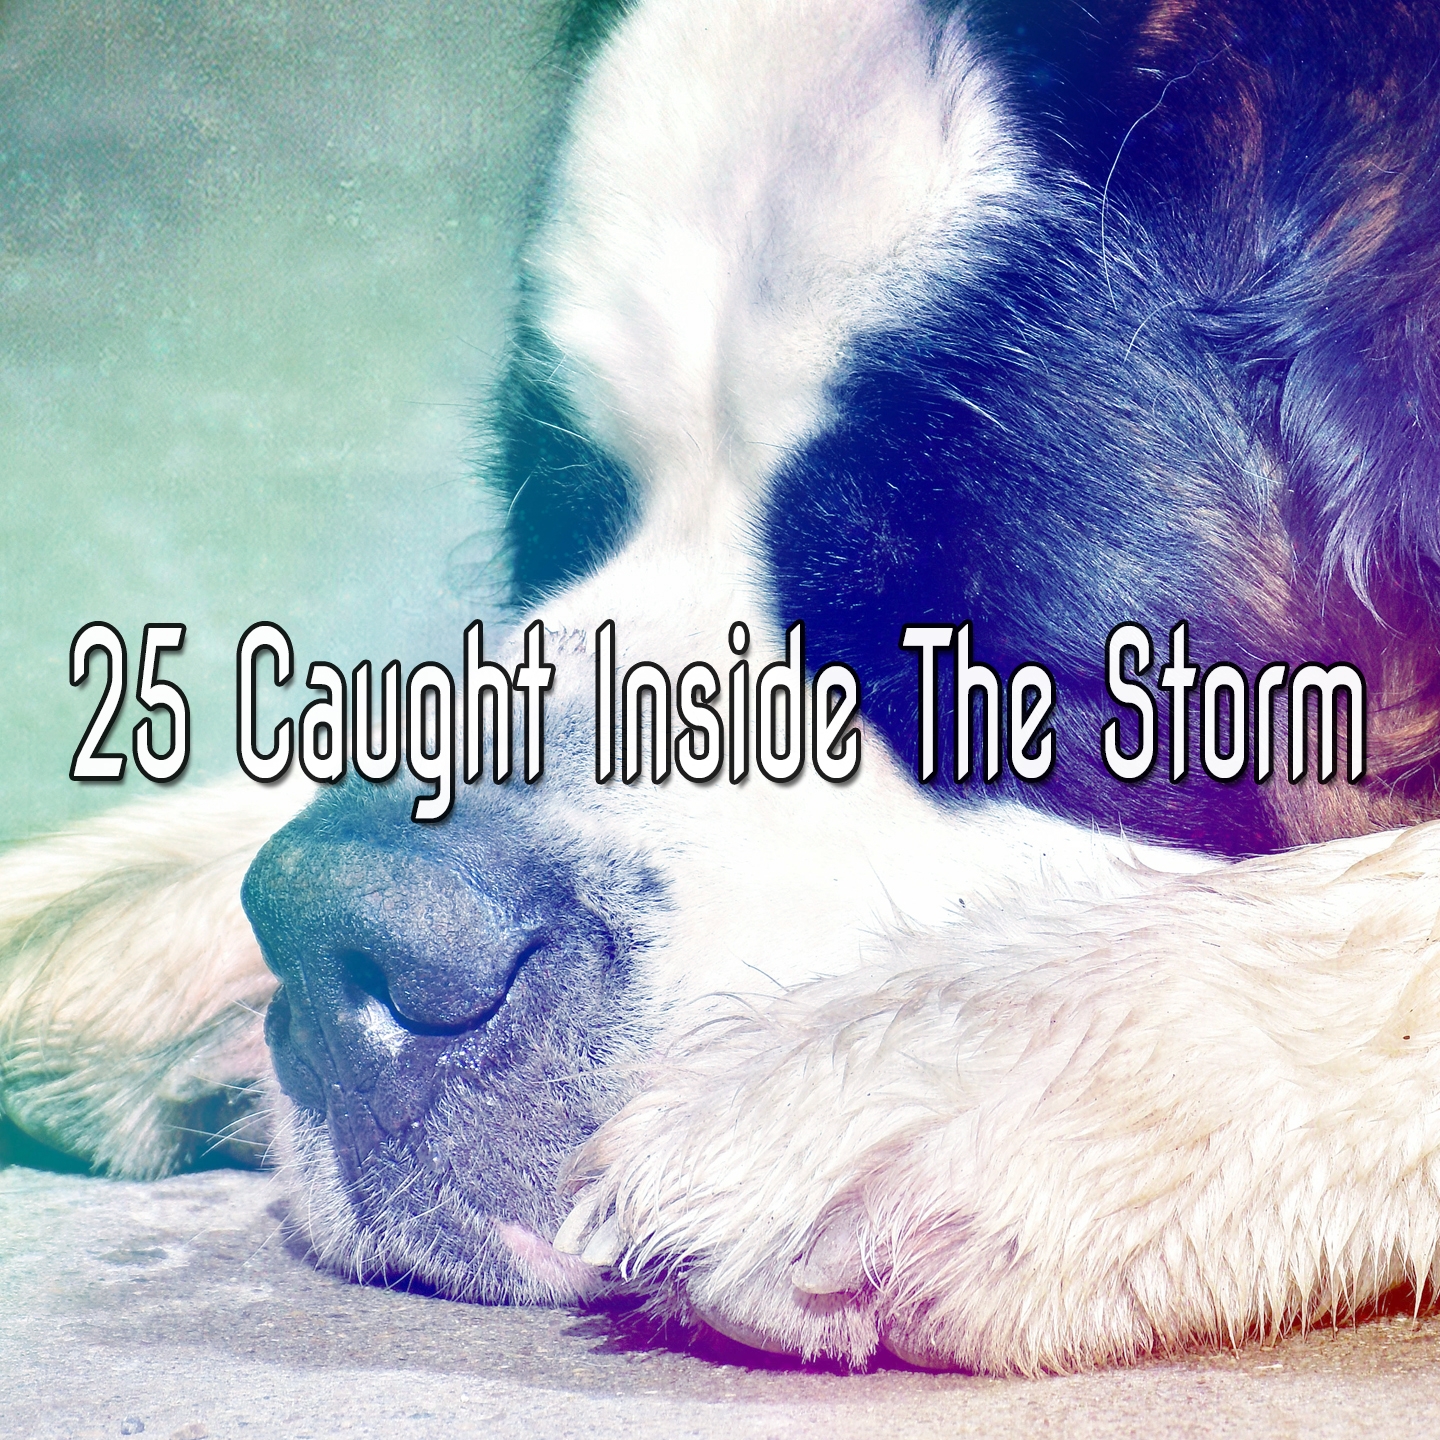 25 Caught Inside the Storm